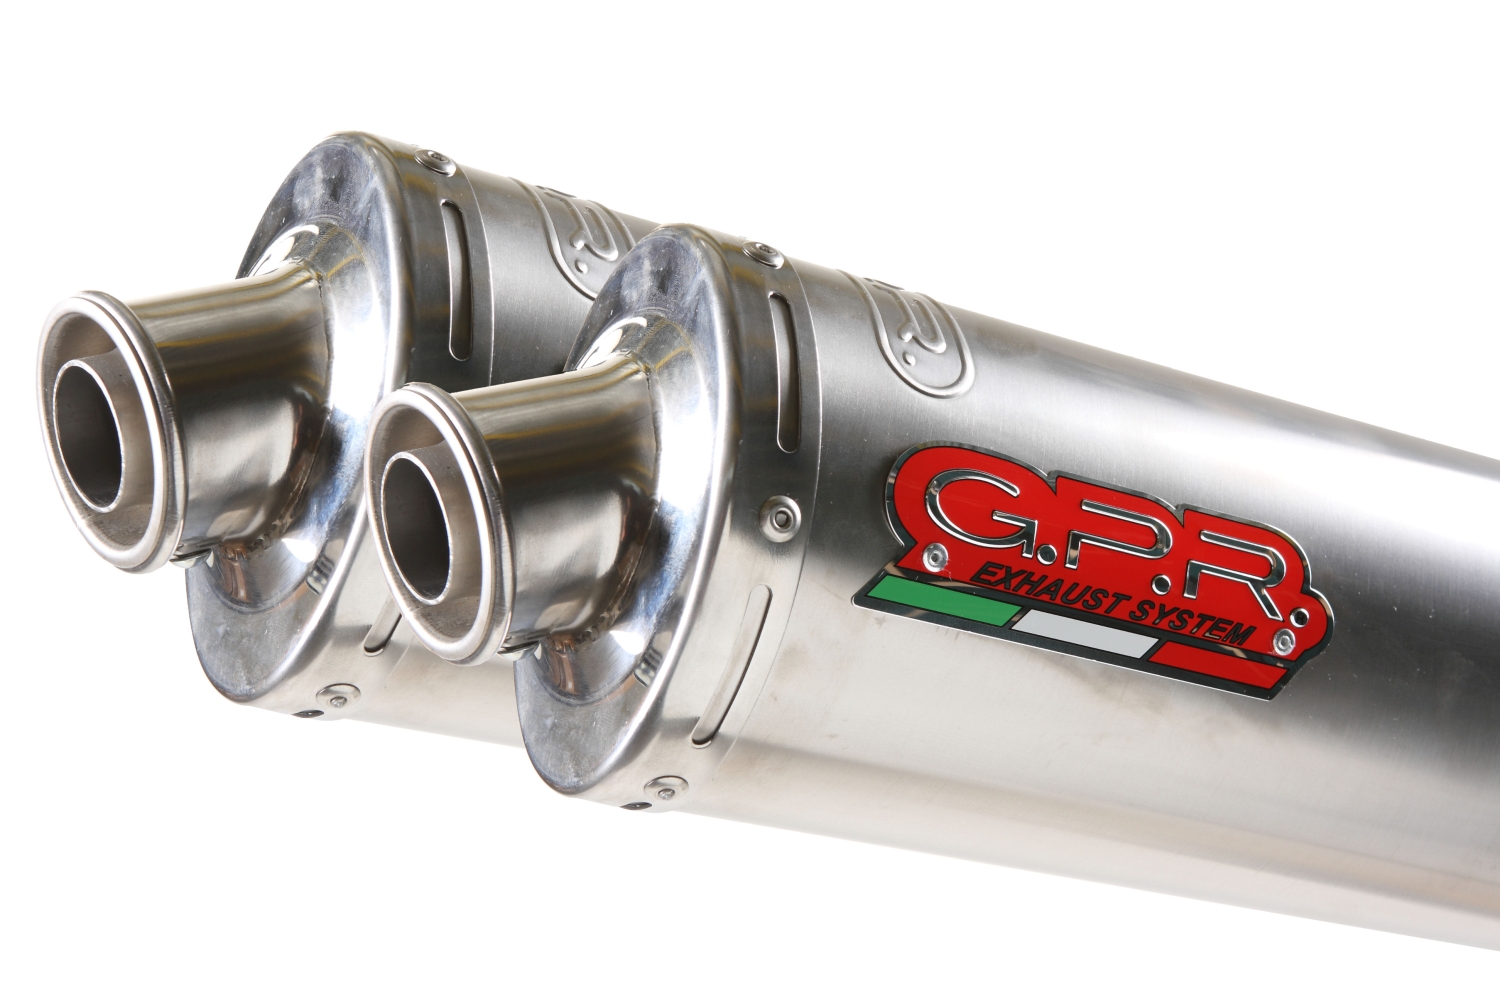 Exhaust system compatible with Honda Fmx 650 2005-2008, Inox Tondo / Round, Dual Homologated legal slip-on exhaust including removable db killers and link pipes 